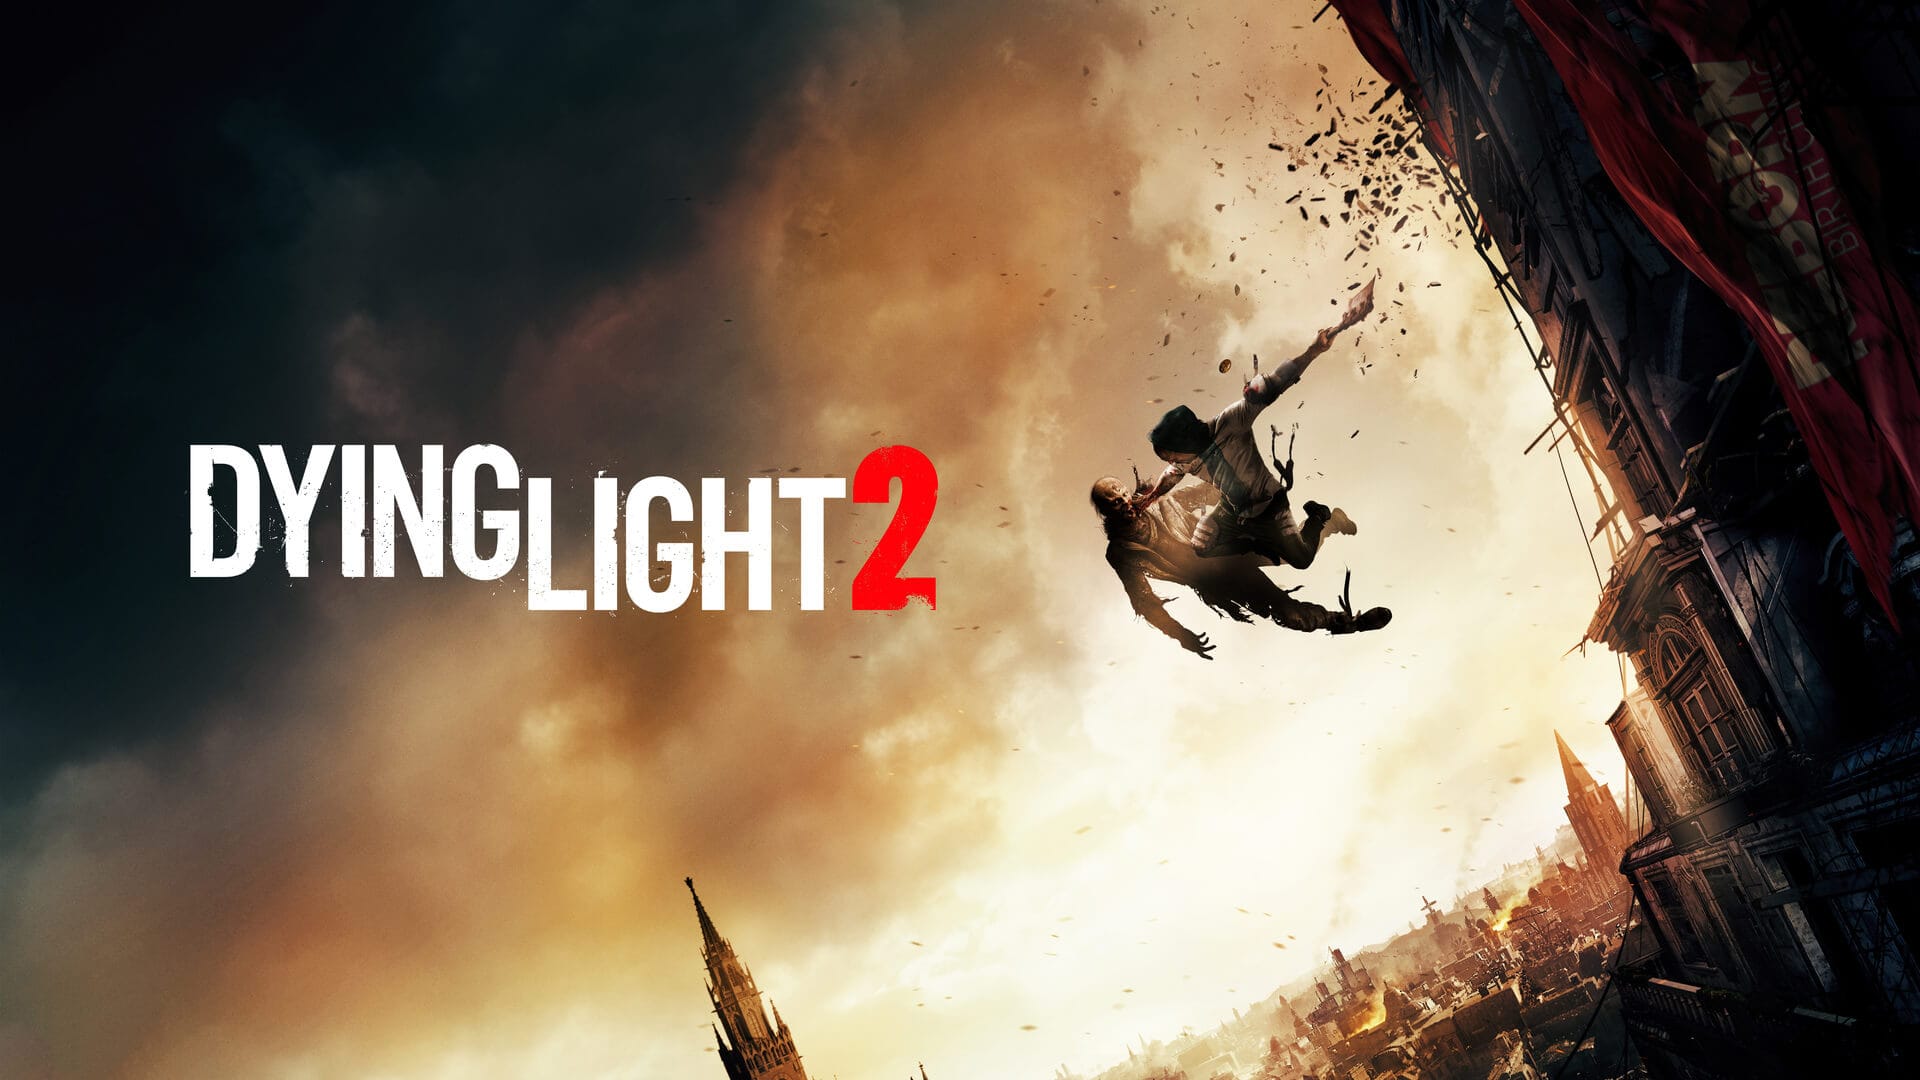 Vampire: The Masquerade' Arrives in 'Dying Light 2' for Week-Long Event  Starting Today - Bloody Disgusting